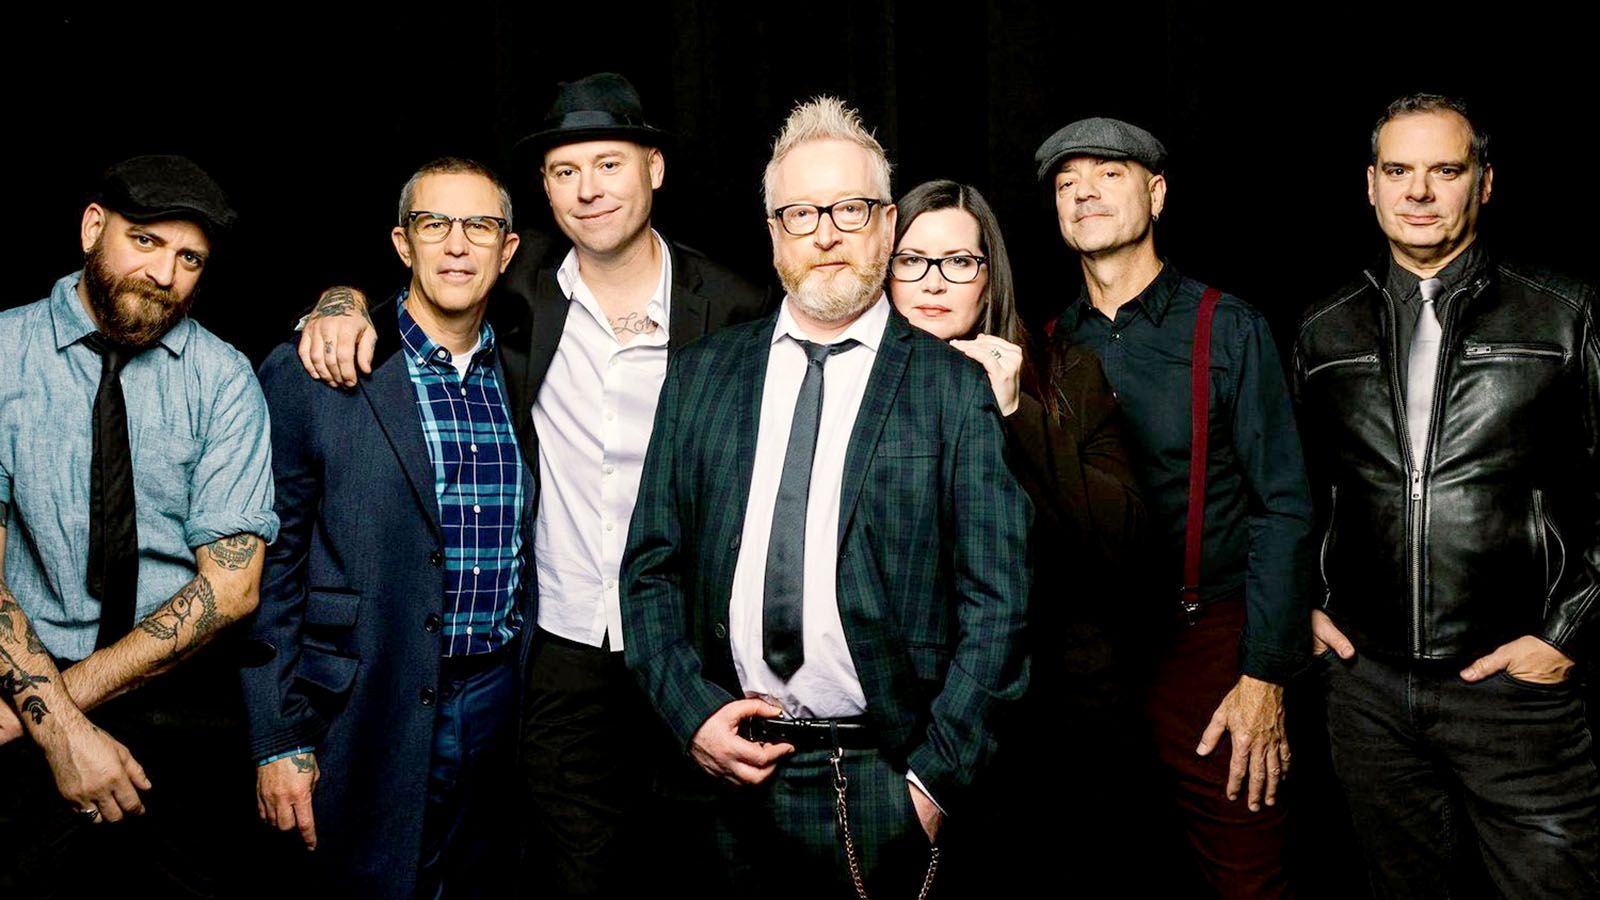 Flogging Molly will be at The Clyde Theatre on March 5.